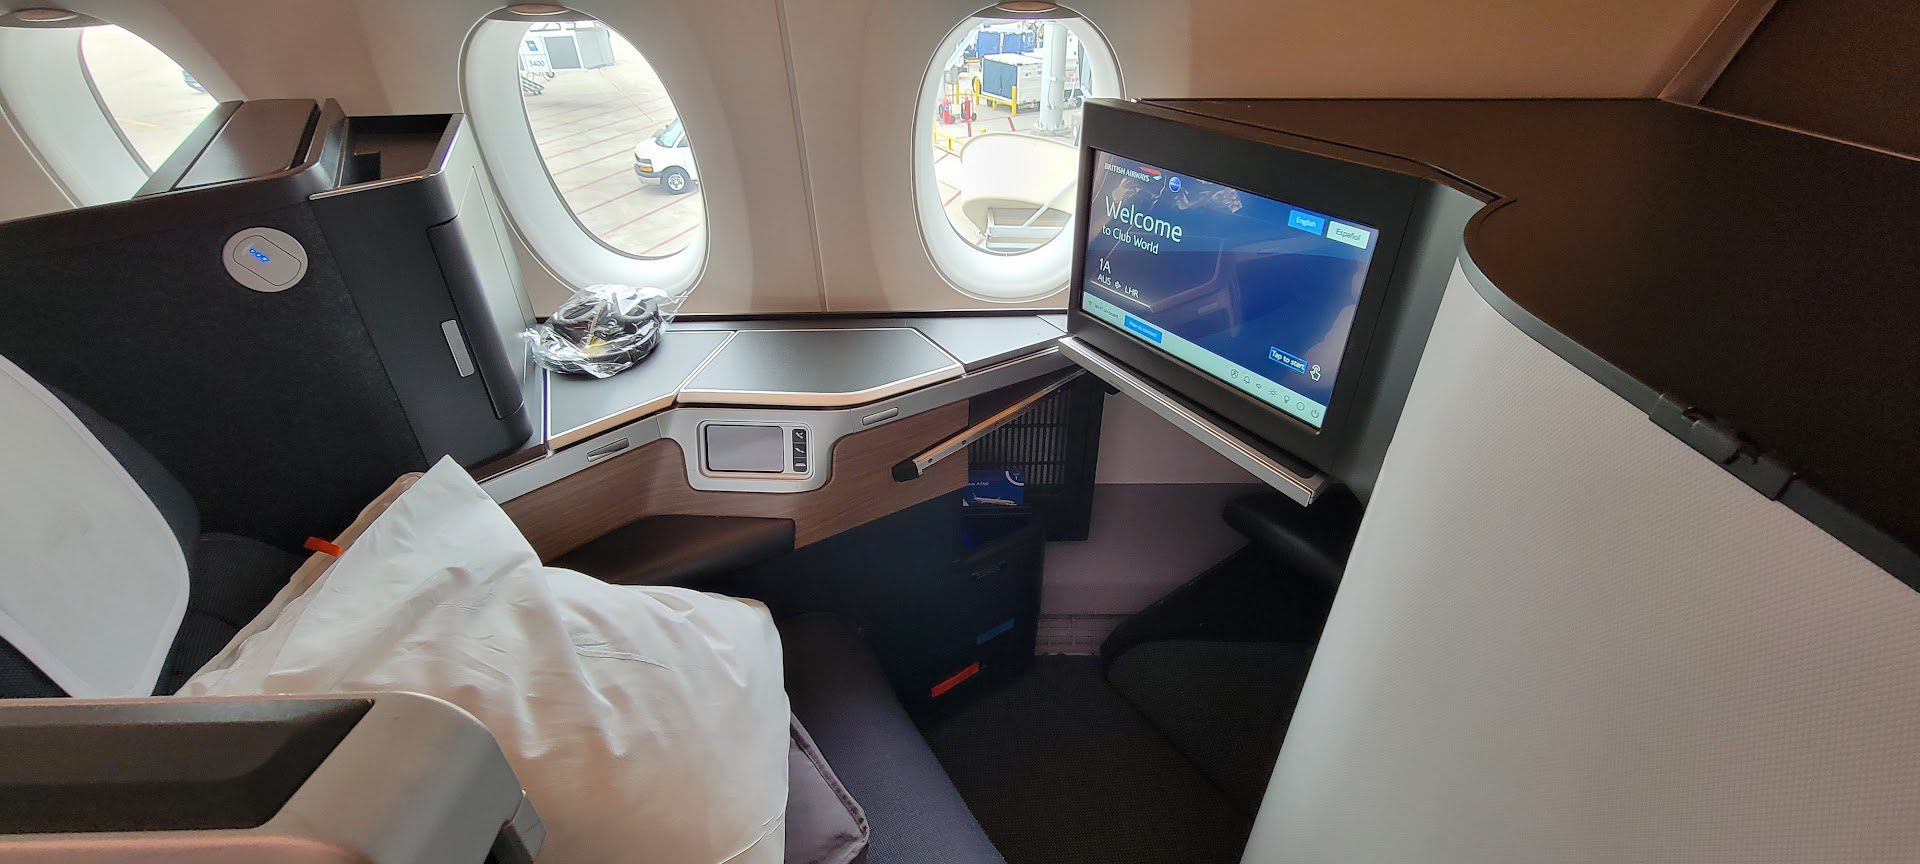 Why British Airways Business Class Is Mediocre (But Totally Worth It Spending Miles)